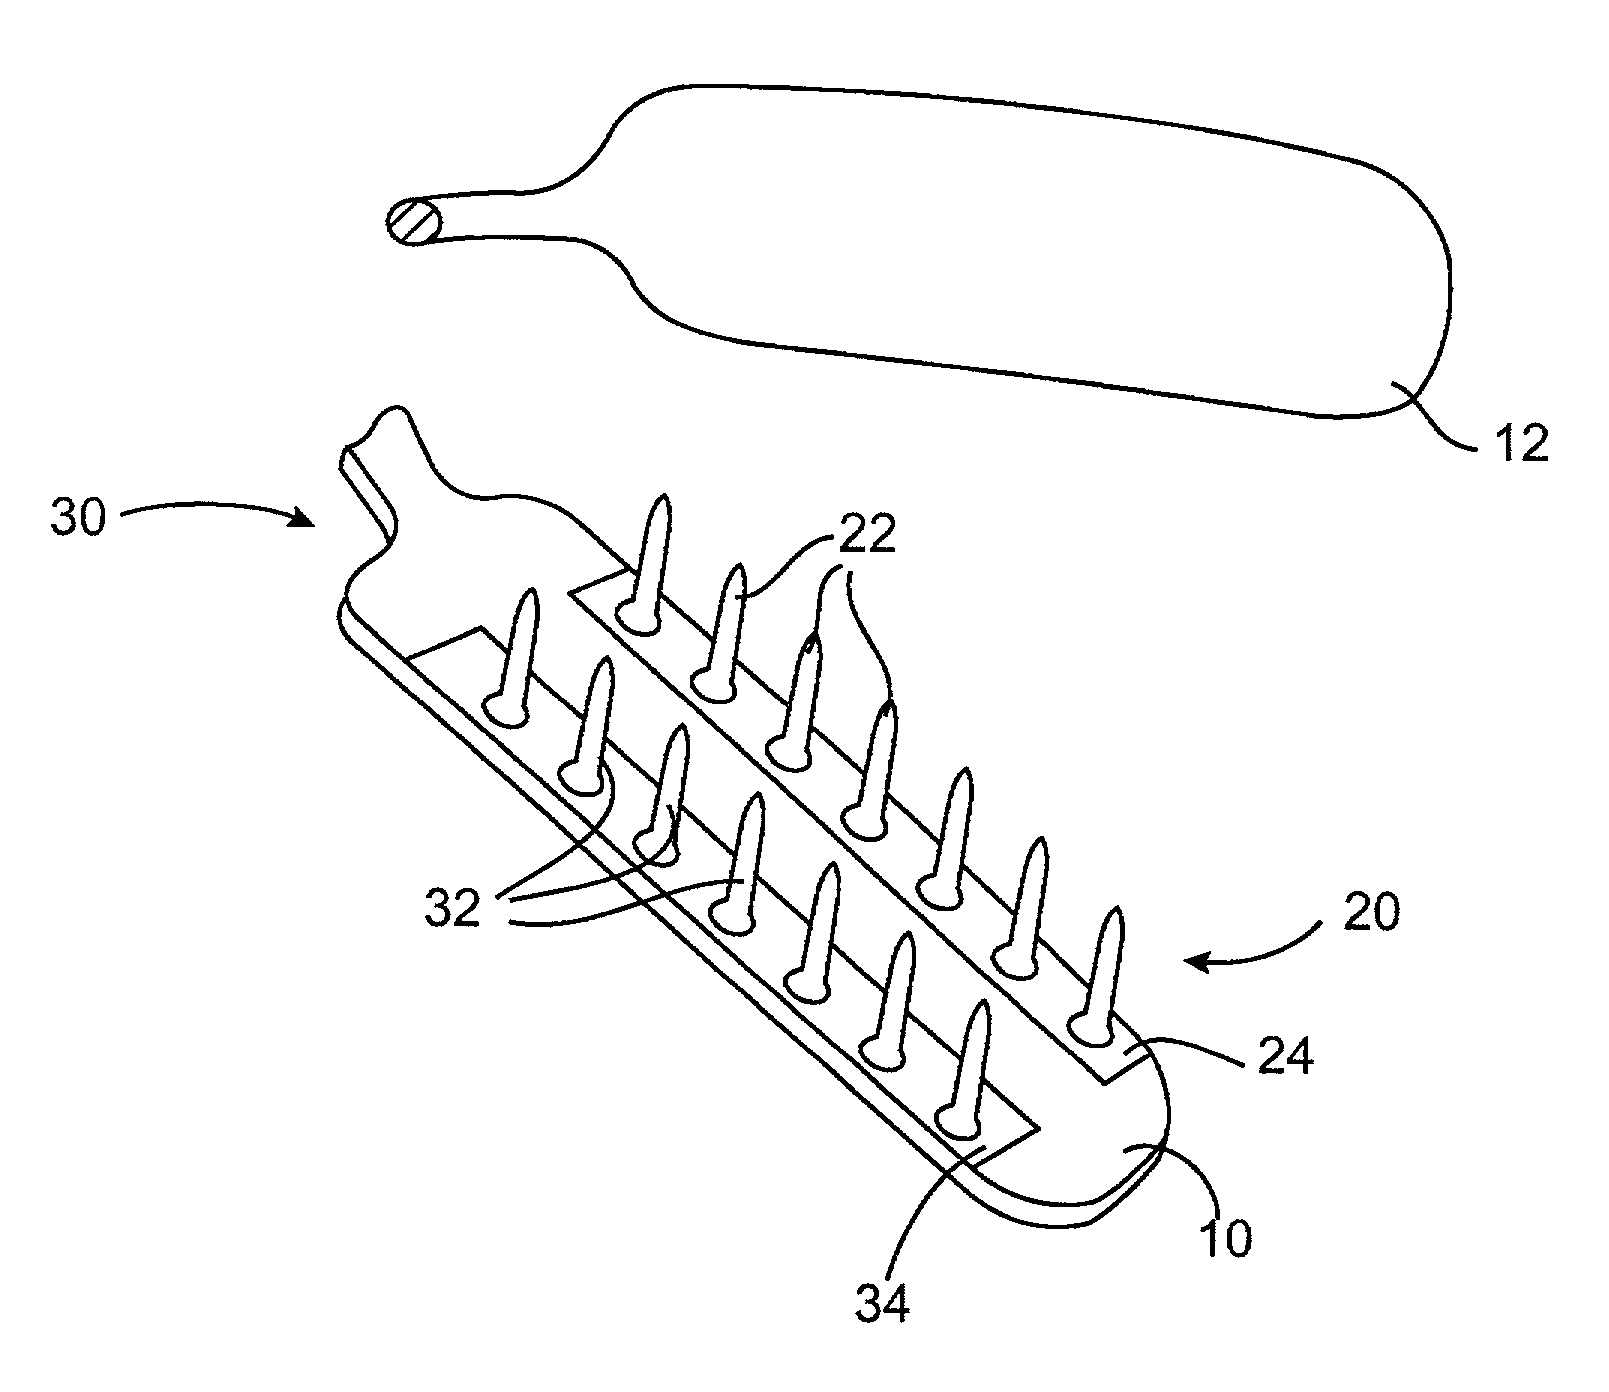 Bipolar surgical instruments having focused electrical fields